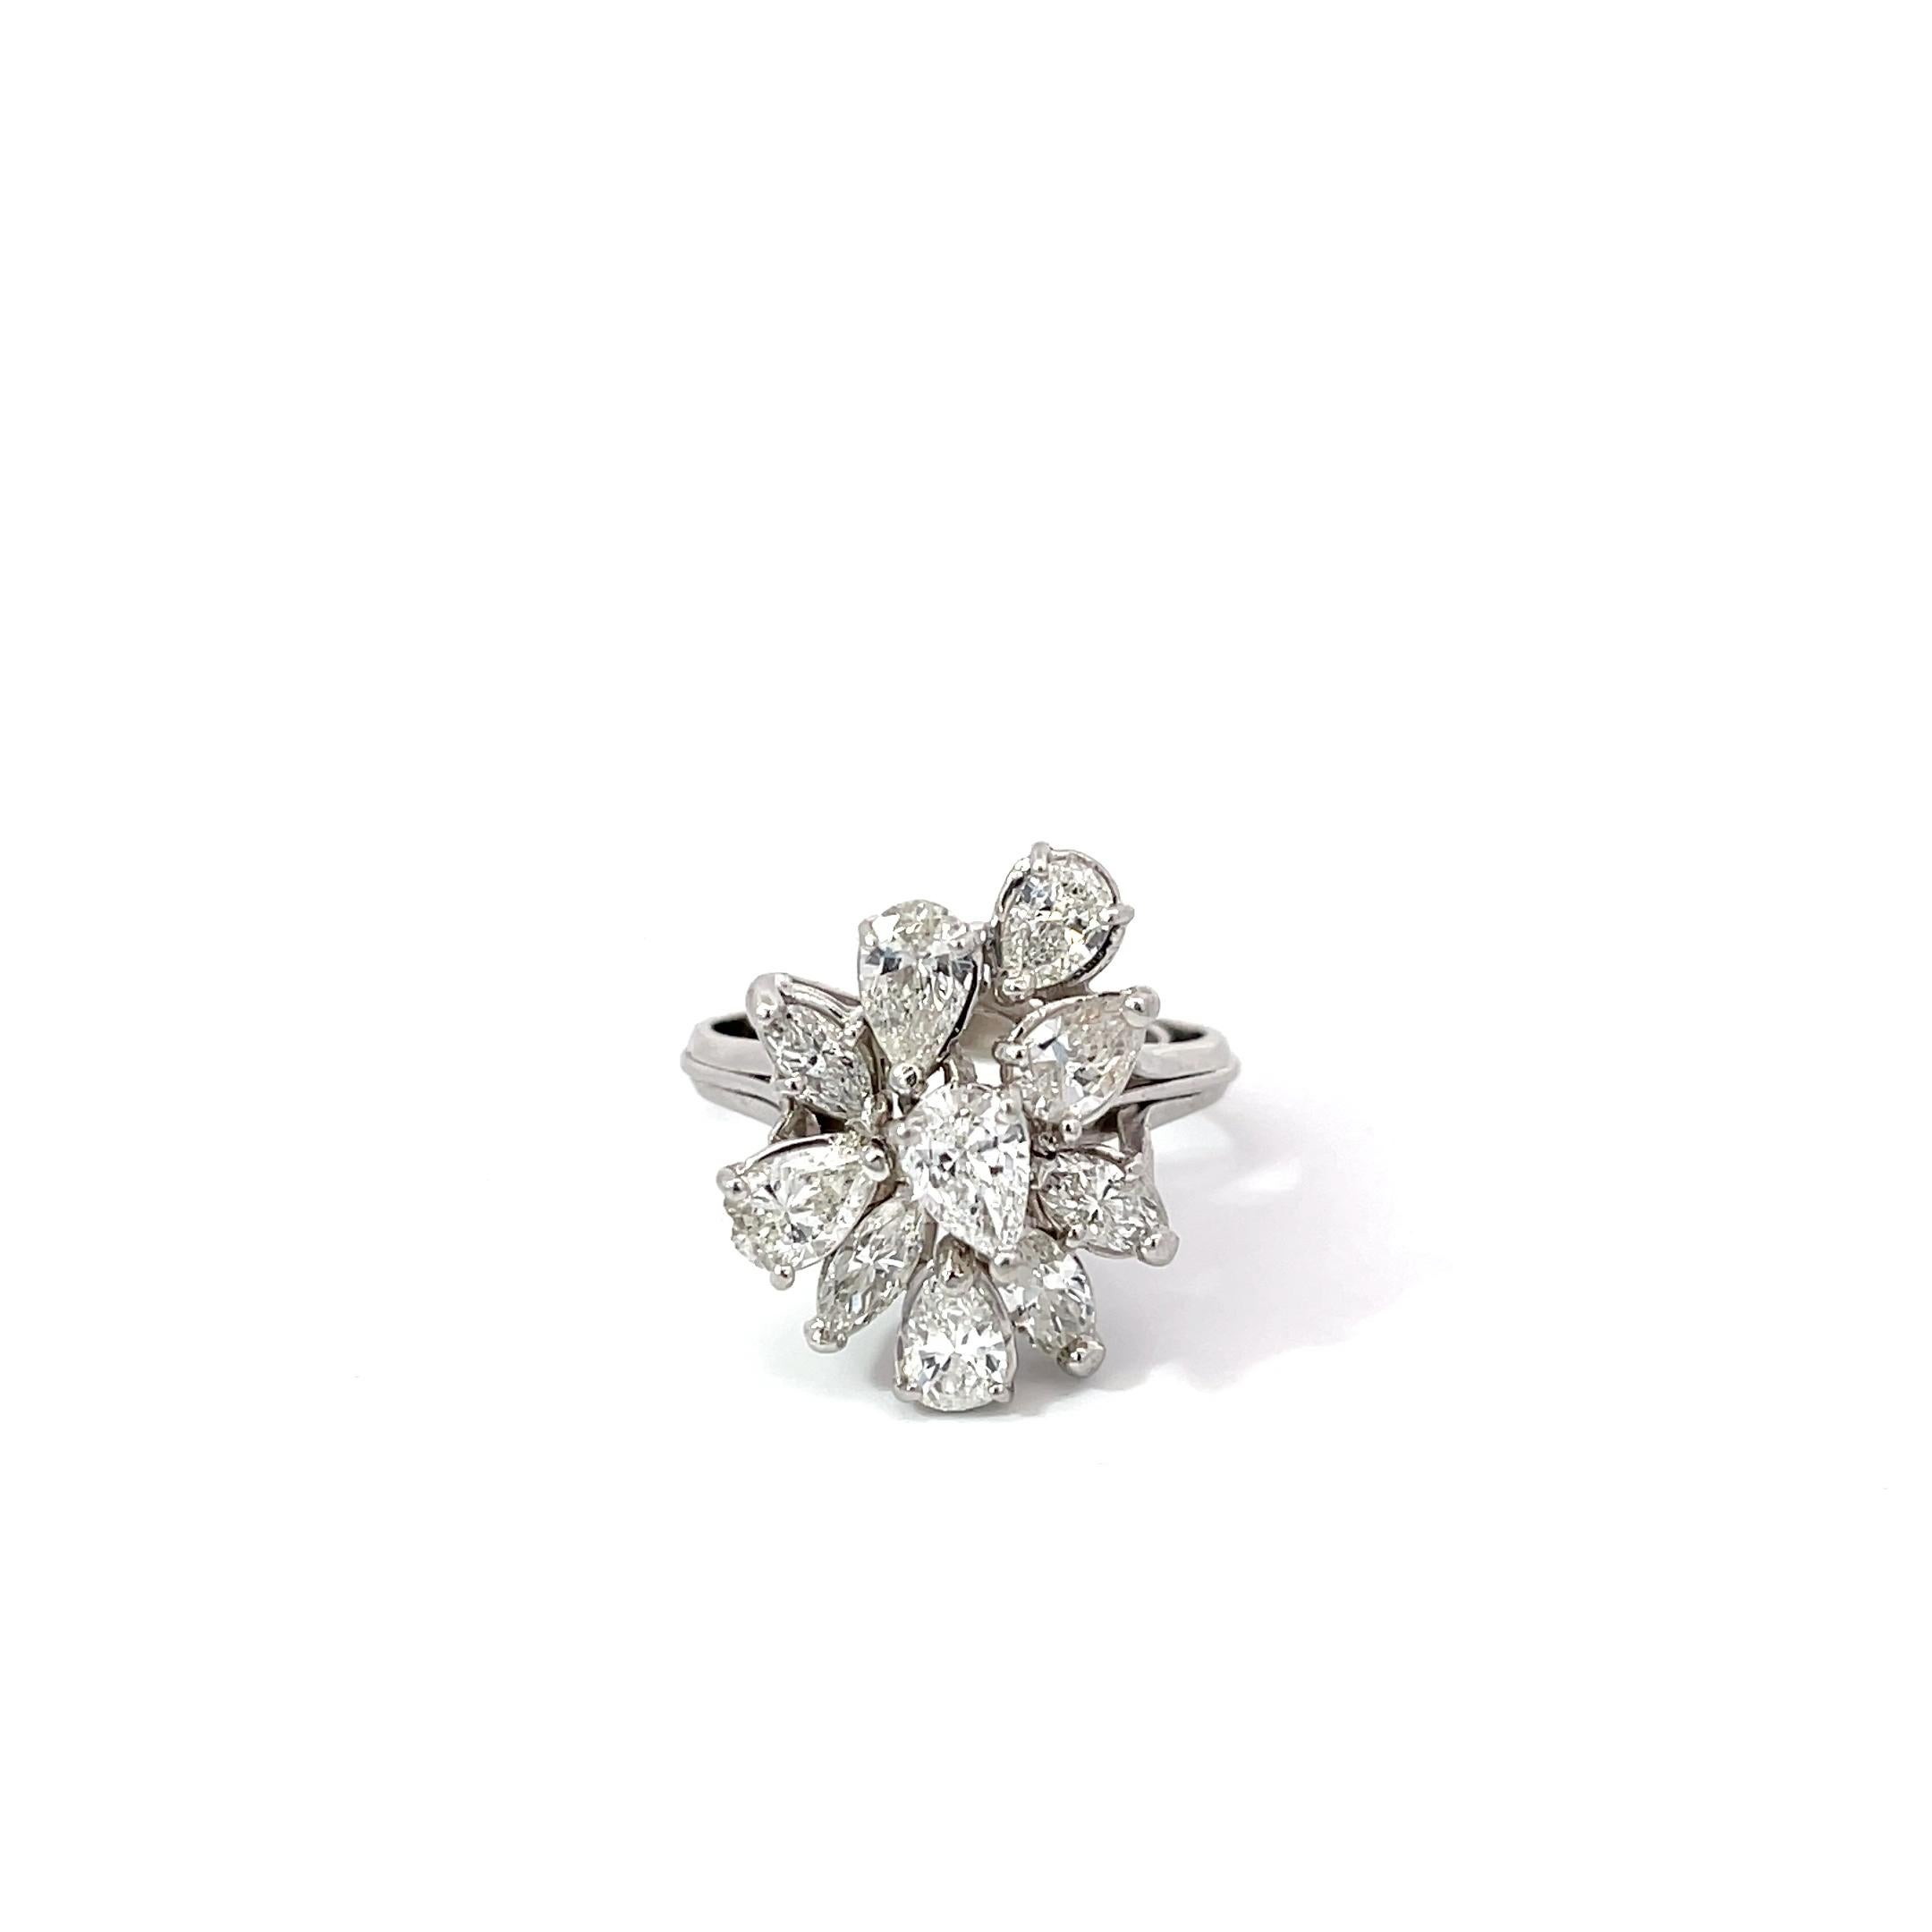 Cluster Diamond Ring in Platinum. The ring features 2.50ctw of pear and marquise cut diamonds. Ring size 9